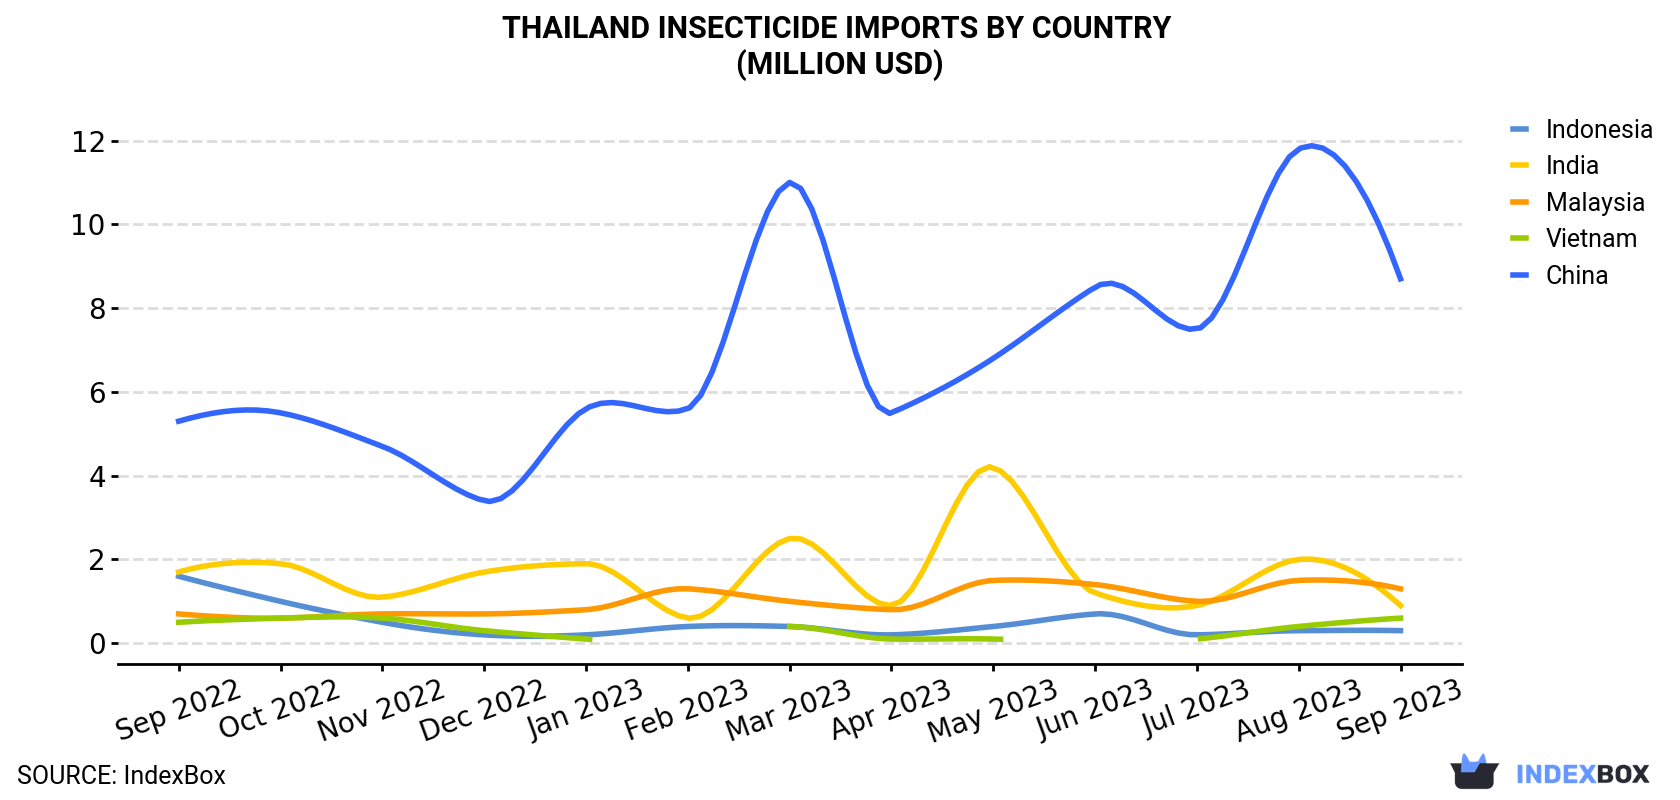 Thailand Insecticide Imports By Country (Million USD)